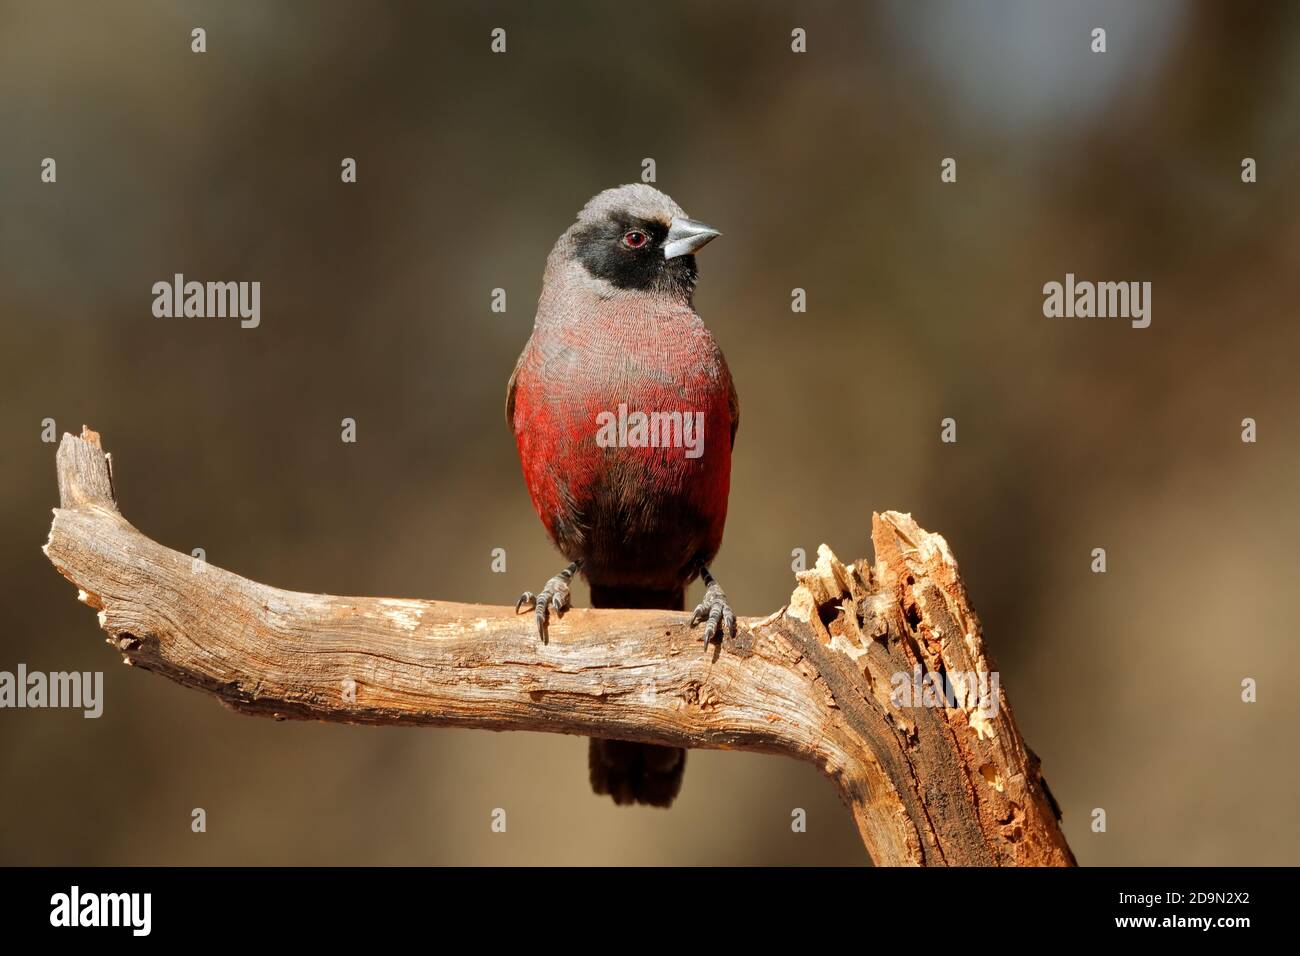 A small black-faced waxbill (Estrilda erythronotos) perched on a branch, South Africa Stock Photo